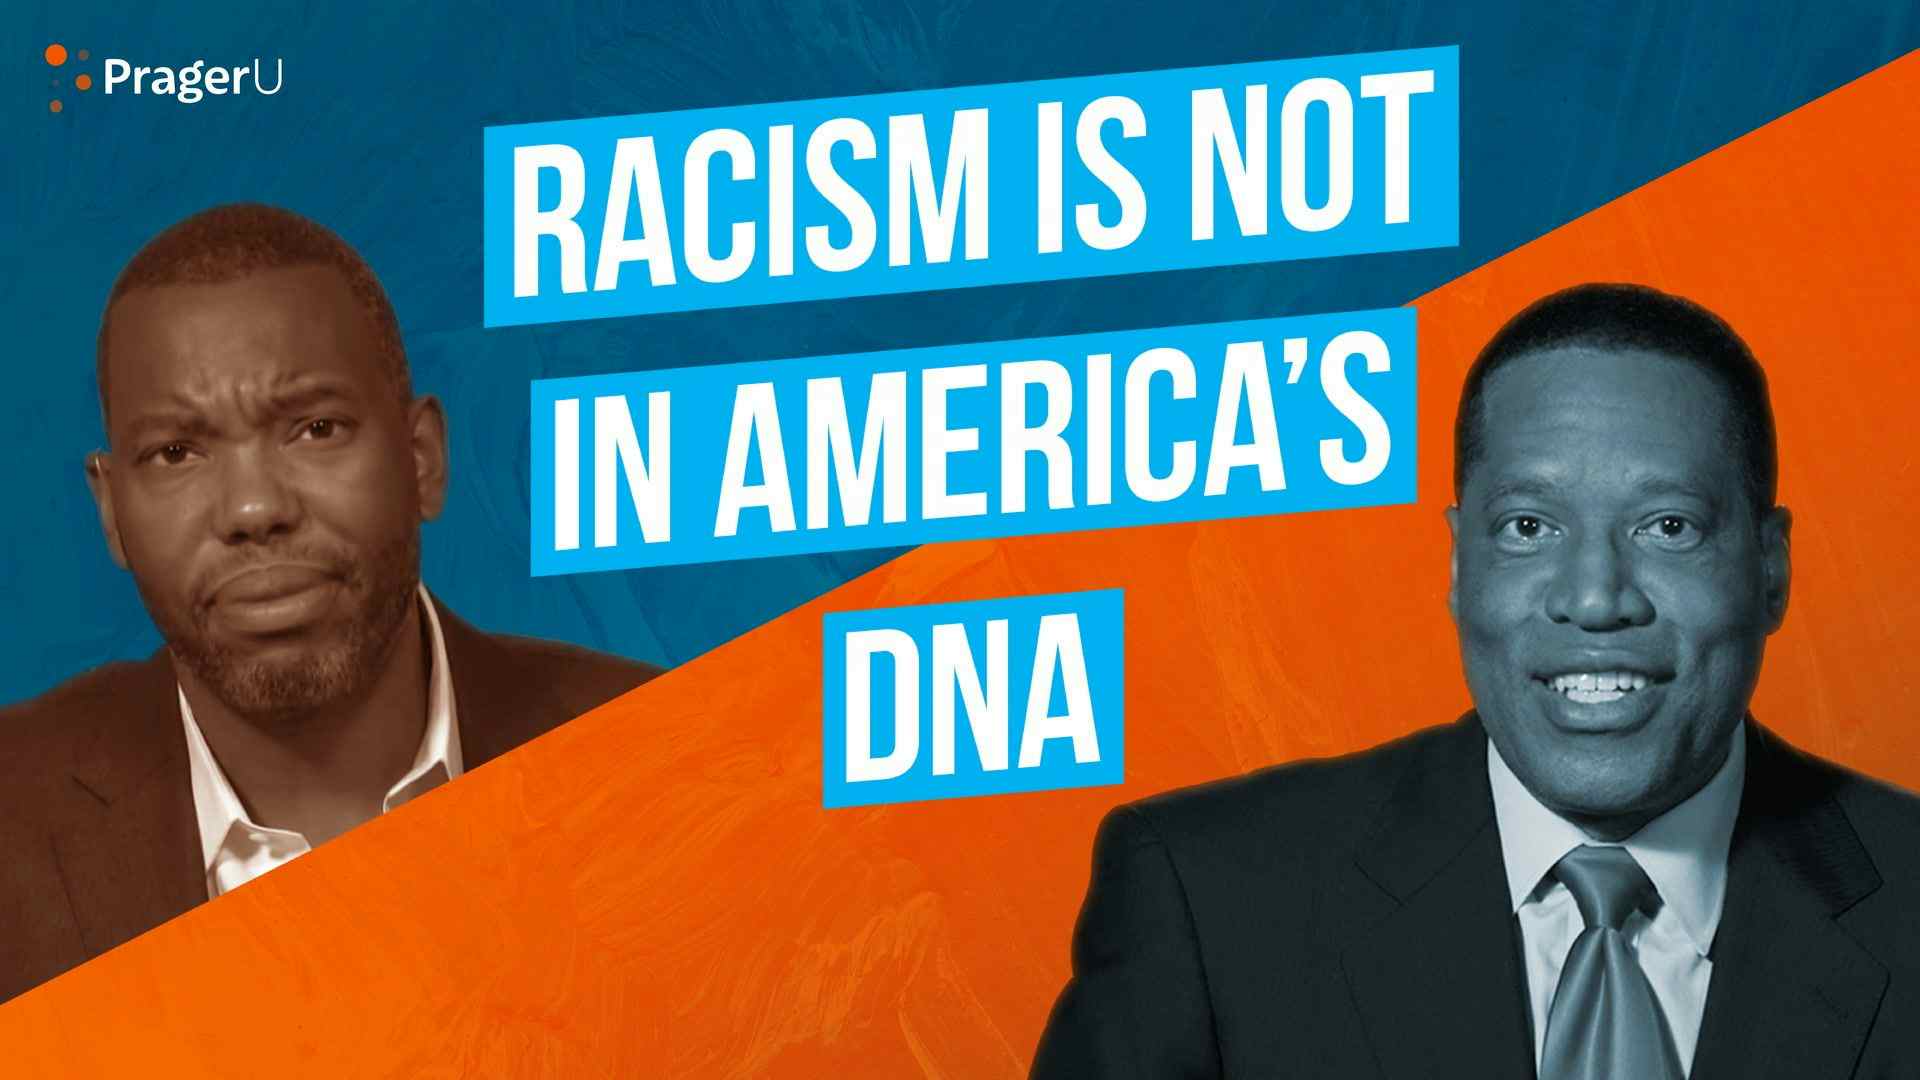 Racism Is Not in America's DNA